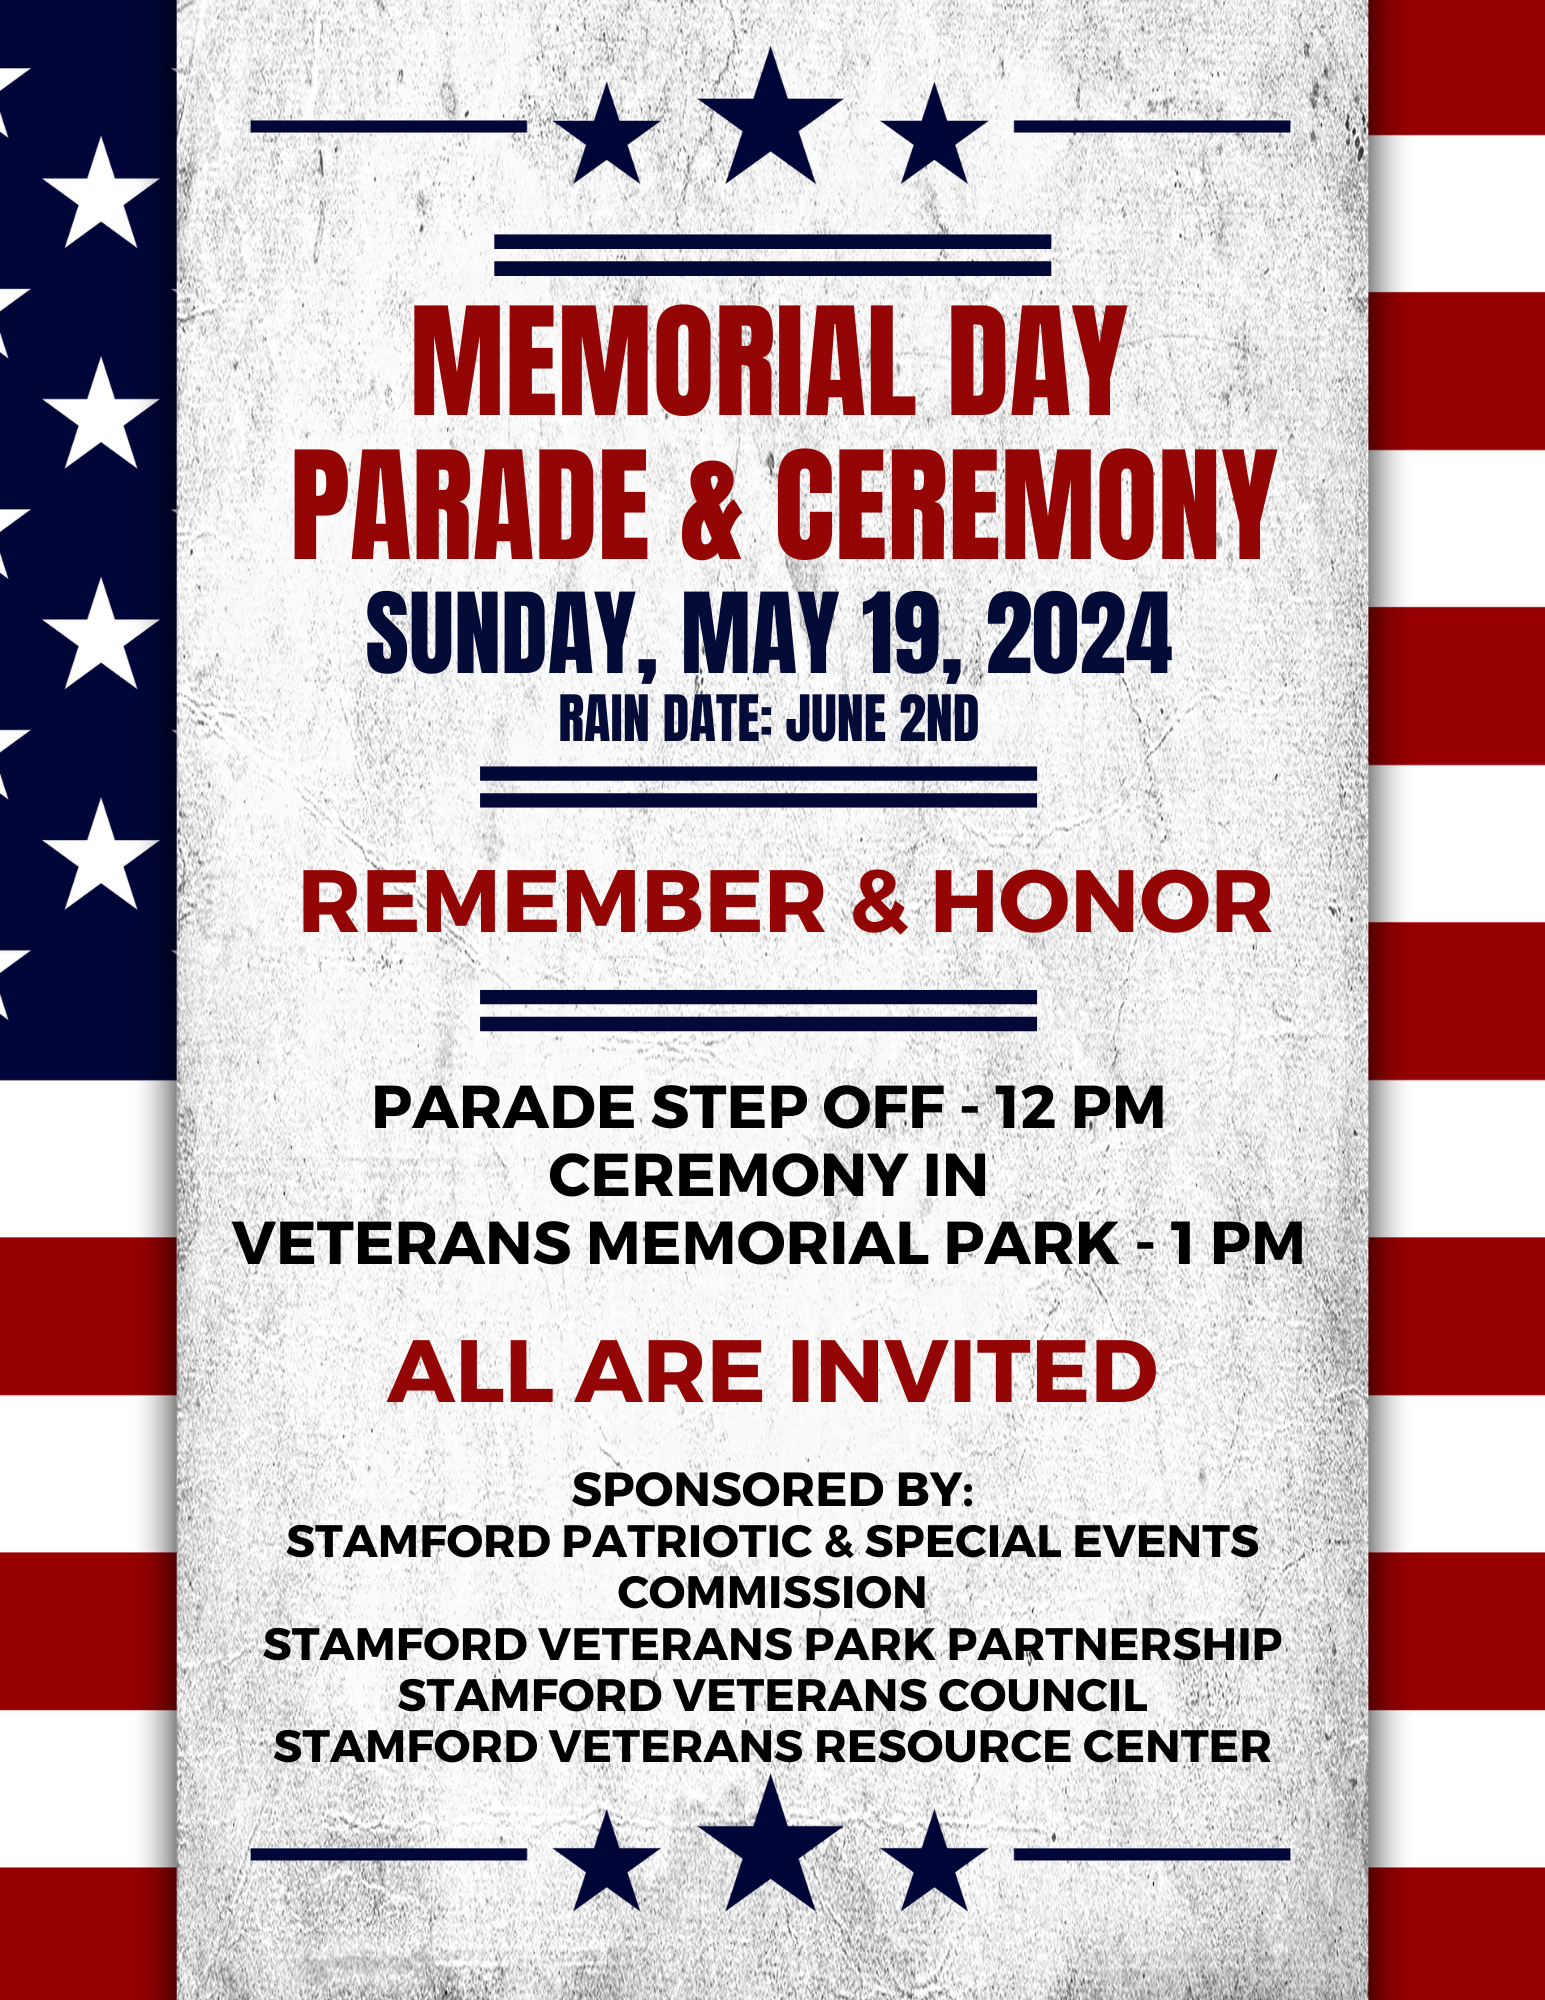 A flyer/invite to the 2024 Memorial Day Parade on the American flag